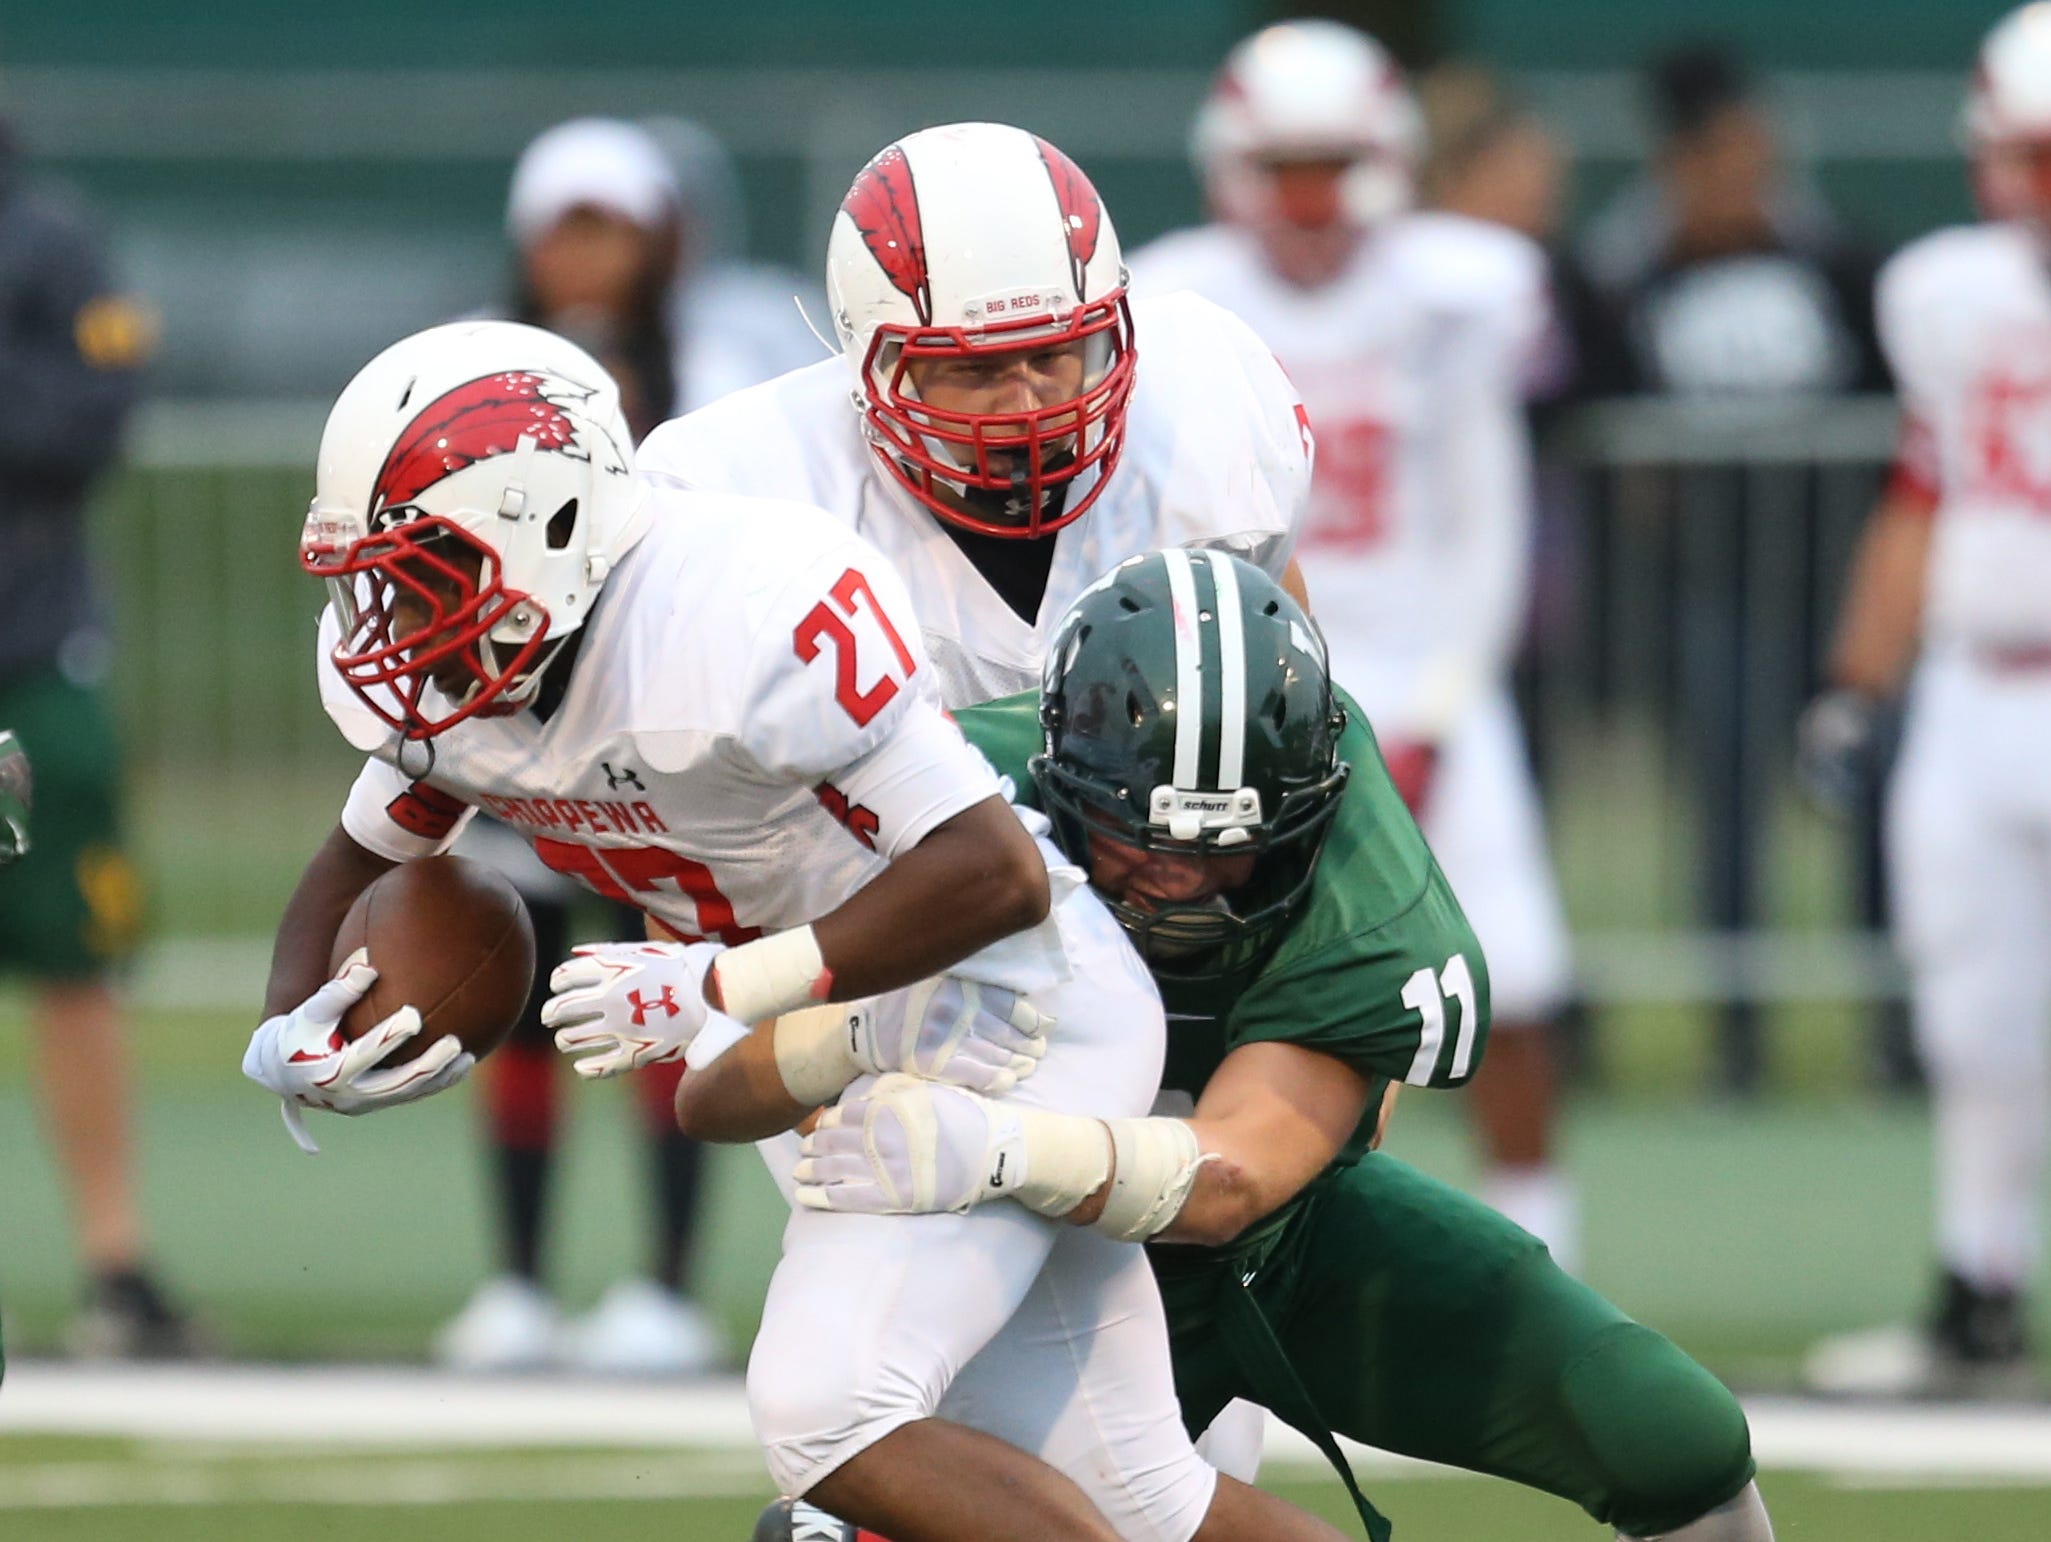 Chippewa Valley high schools Daren Greeley is tackled by Lake Orion high schools Jack McClear during first half action of the Prep Kickoff Classic on Thursday, August 27, 2015 at Wayne States Tom Adams Field in Detroit Michigan.